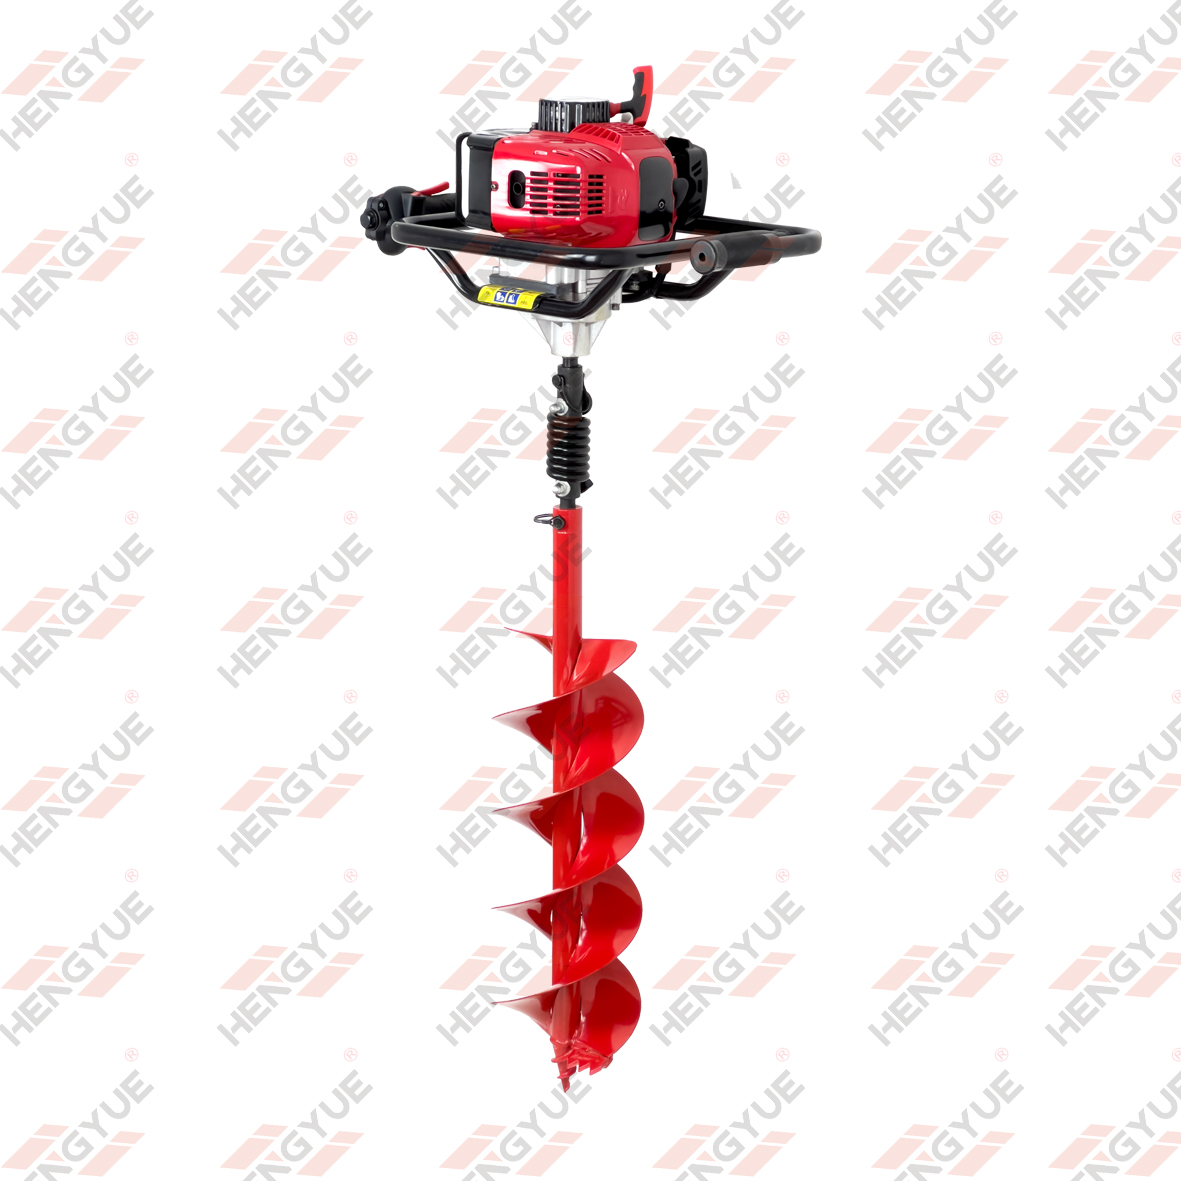 43cc Popular Hand Held Type Earth Auger 